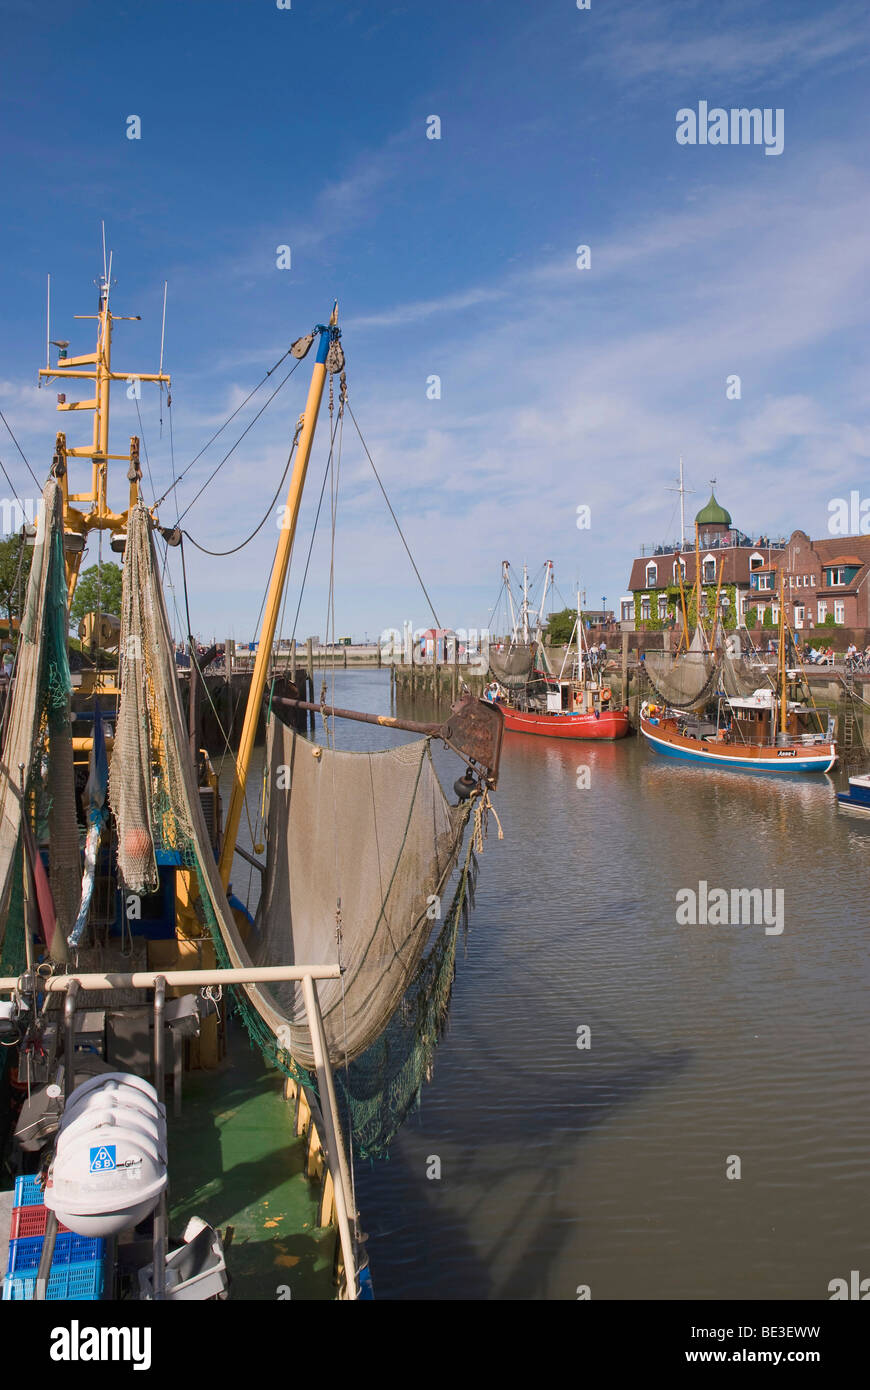 Shrimp cutter in the harbor of Neuharlingersiel, cutter with pulled-up fishing gear in front, Wadden Sea National Park, East Fr Stock Photo